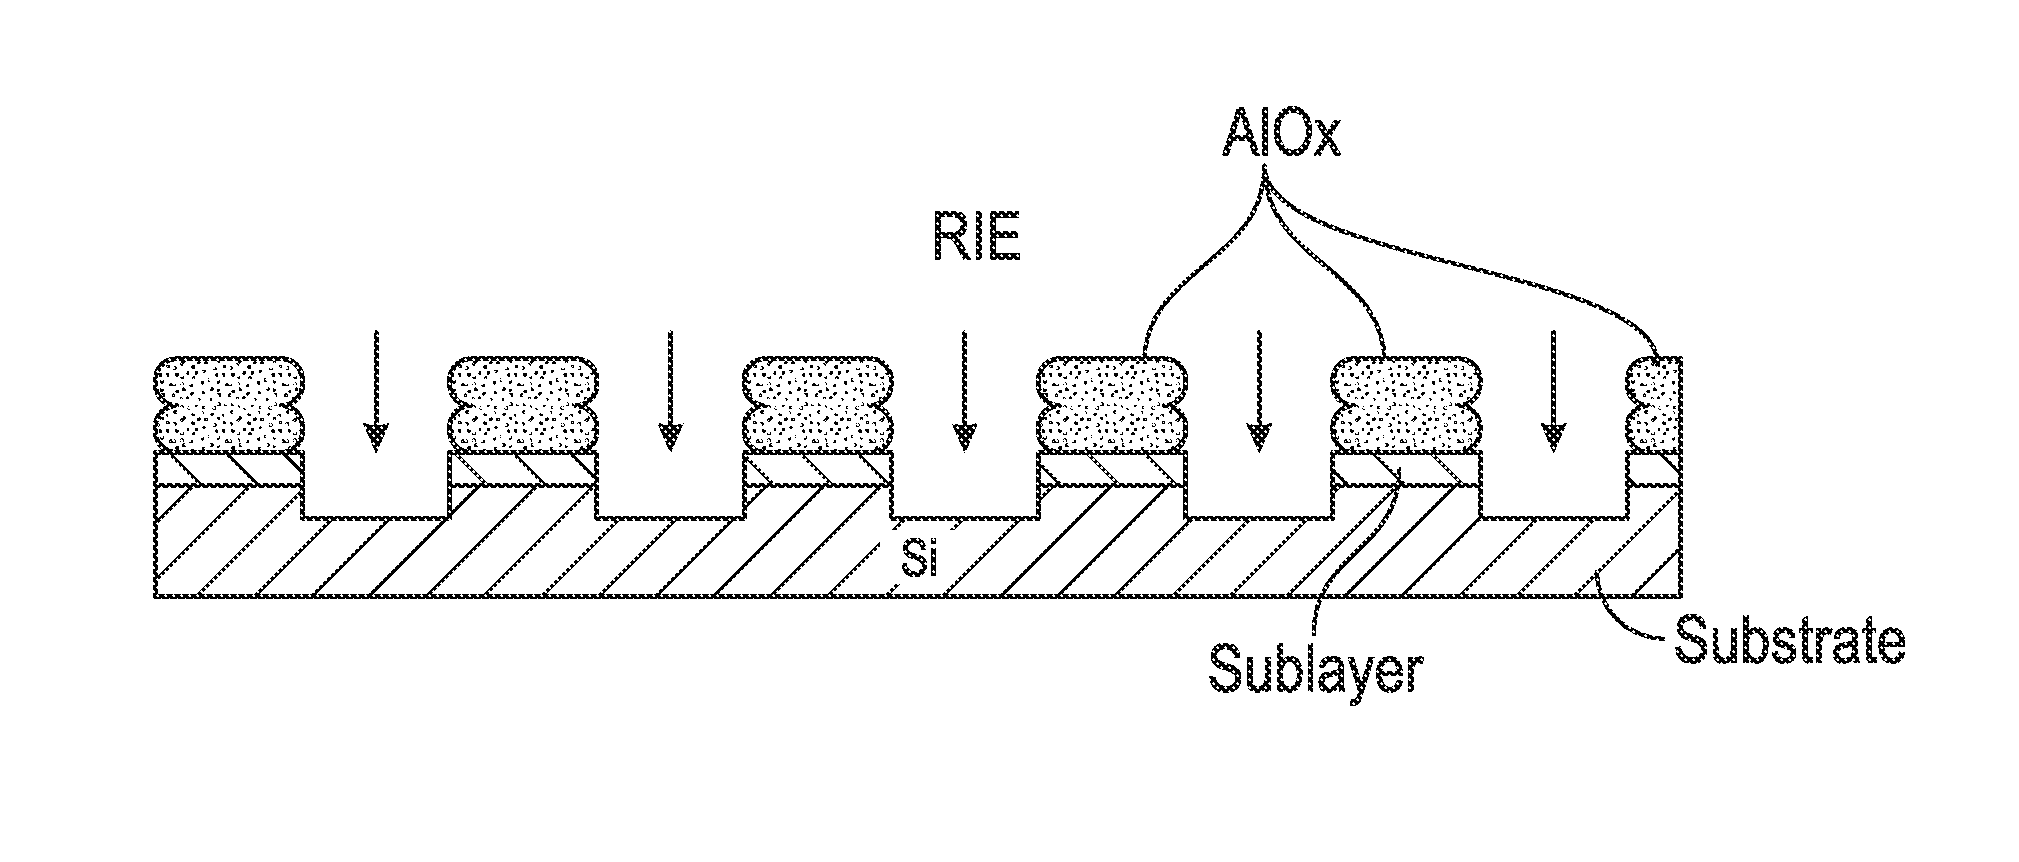 Method for making a chemical contrast pattern using block copolymers and sequential infiltration synthesis